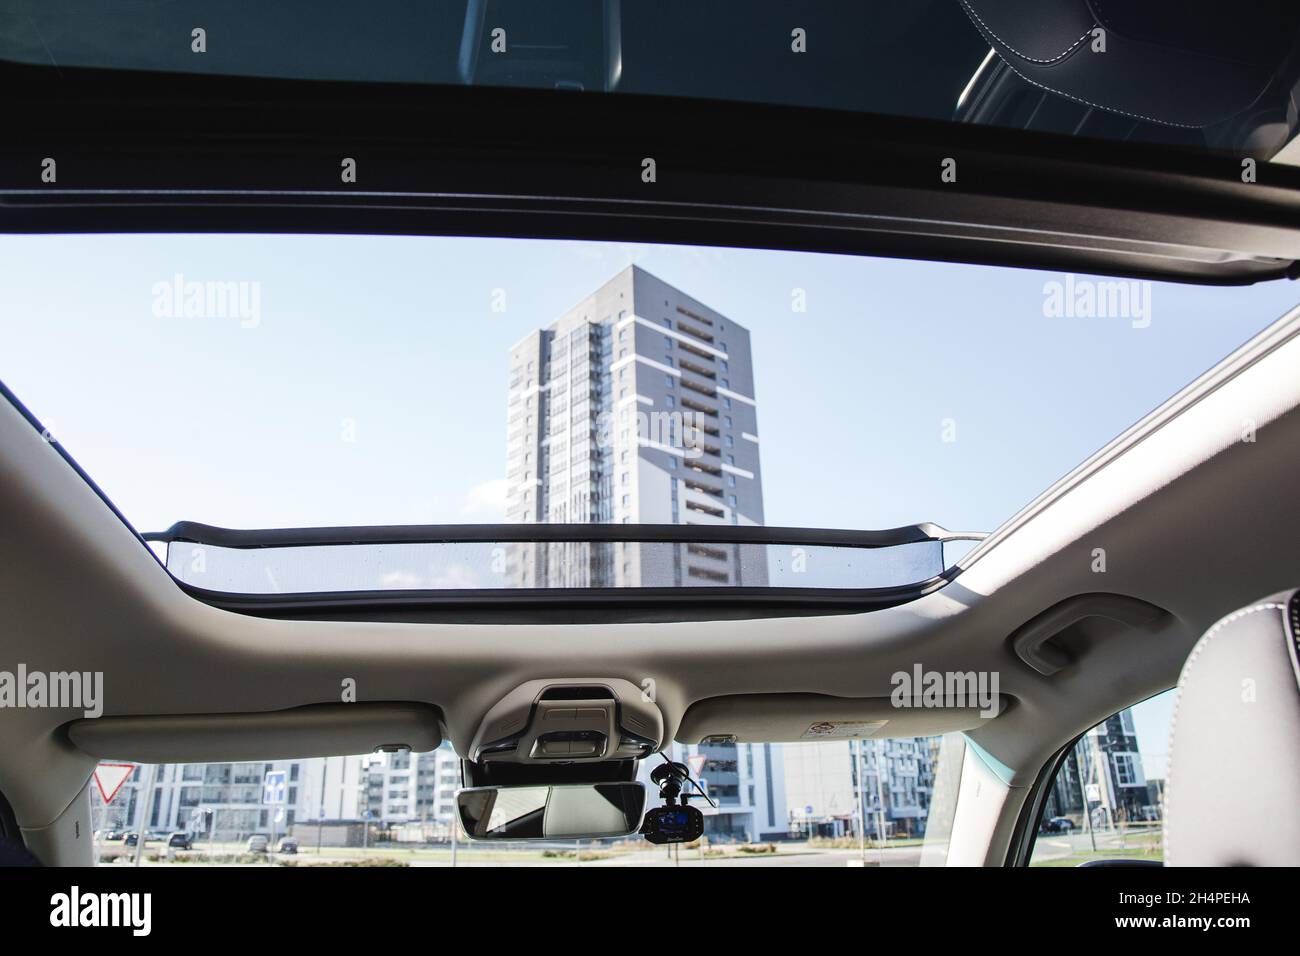 Panoramic roof, dashboard. The view from the empty car trunk with folded rear seats. Stock Photo